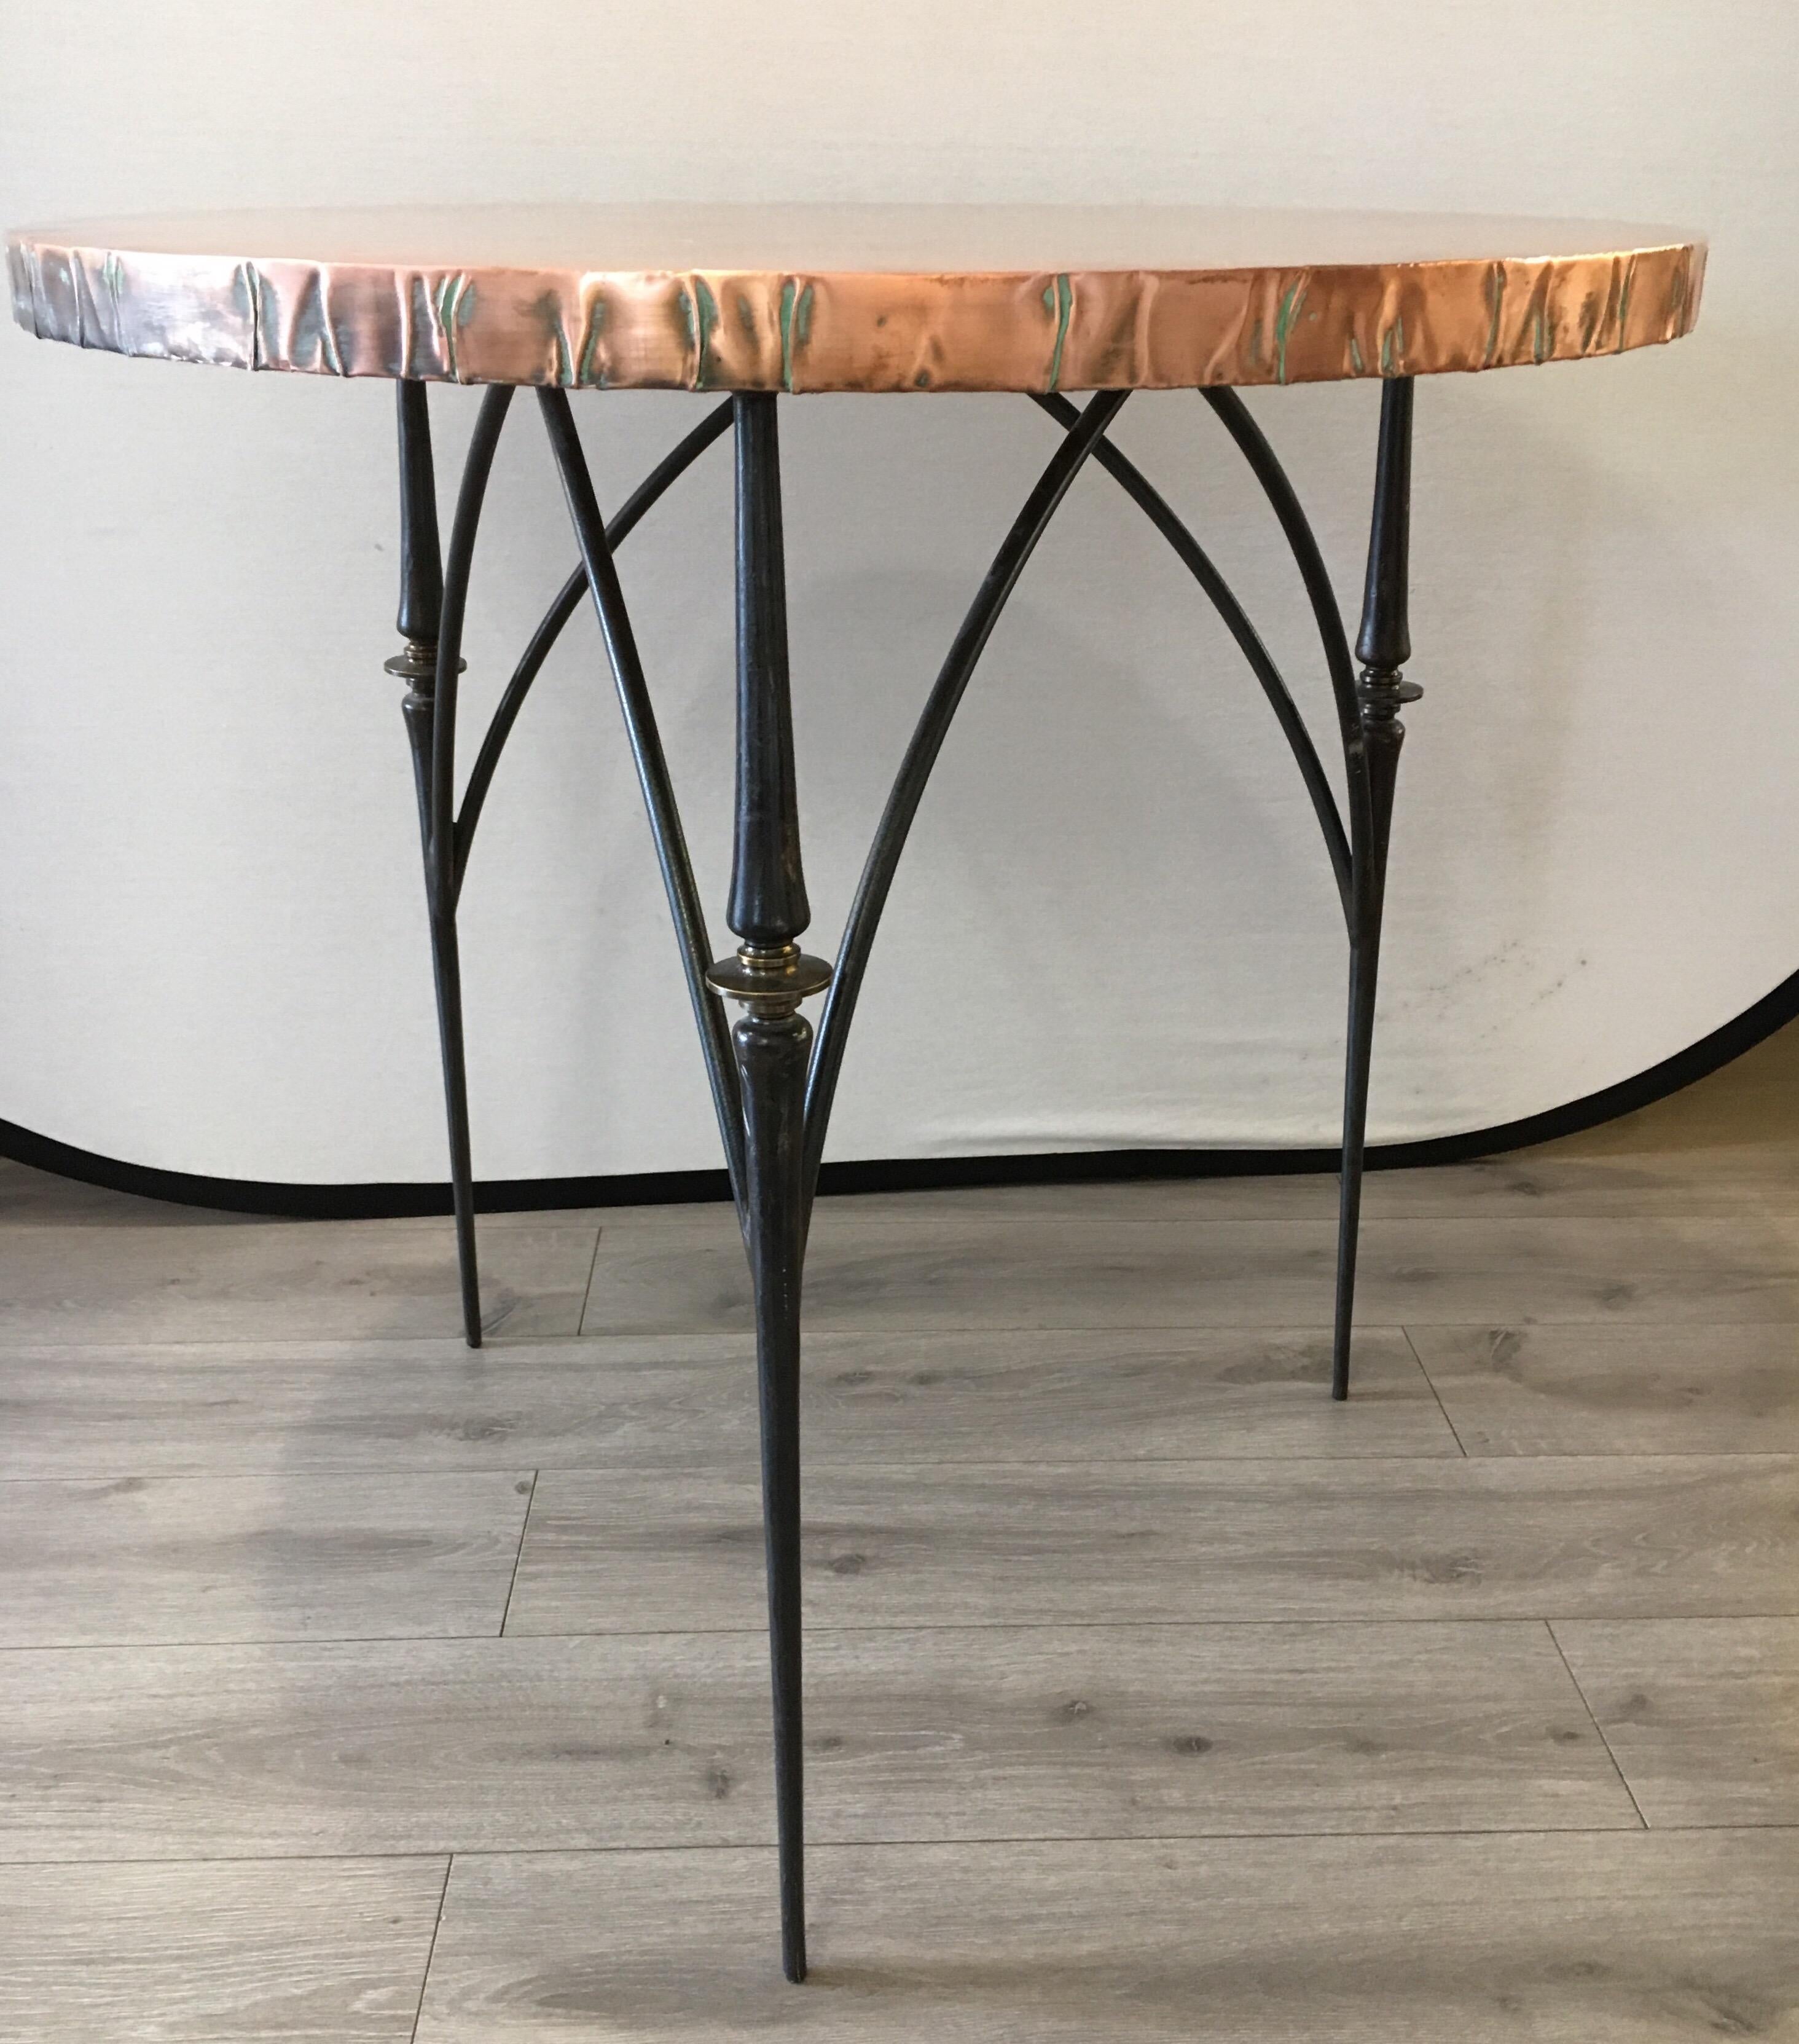 Bespoke foyer or center table that can also be used as a small dining table. In the style of some of the best studio furniture of designers like Paul Evans, this piece has the elemental presence of a modern sculpture. From afar the hammered copper